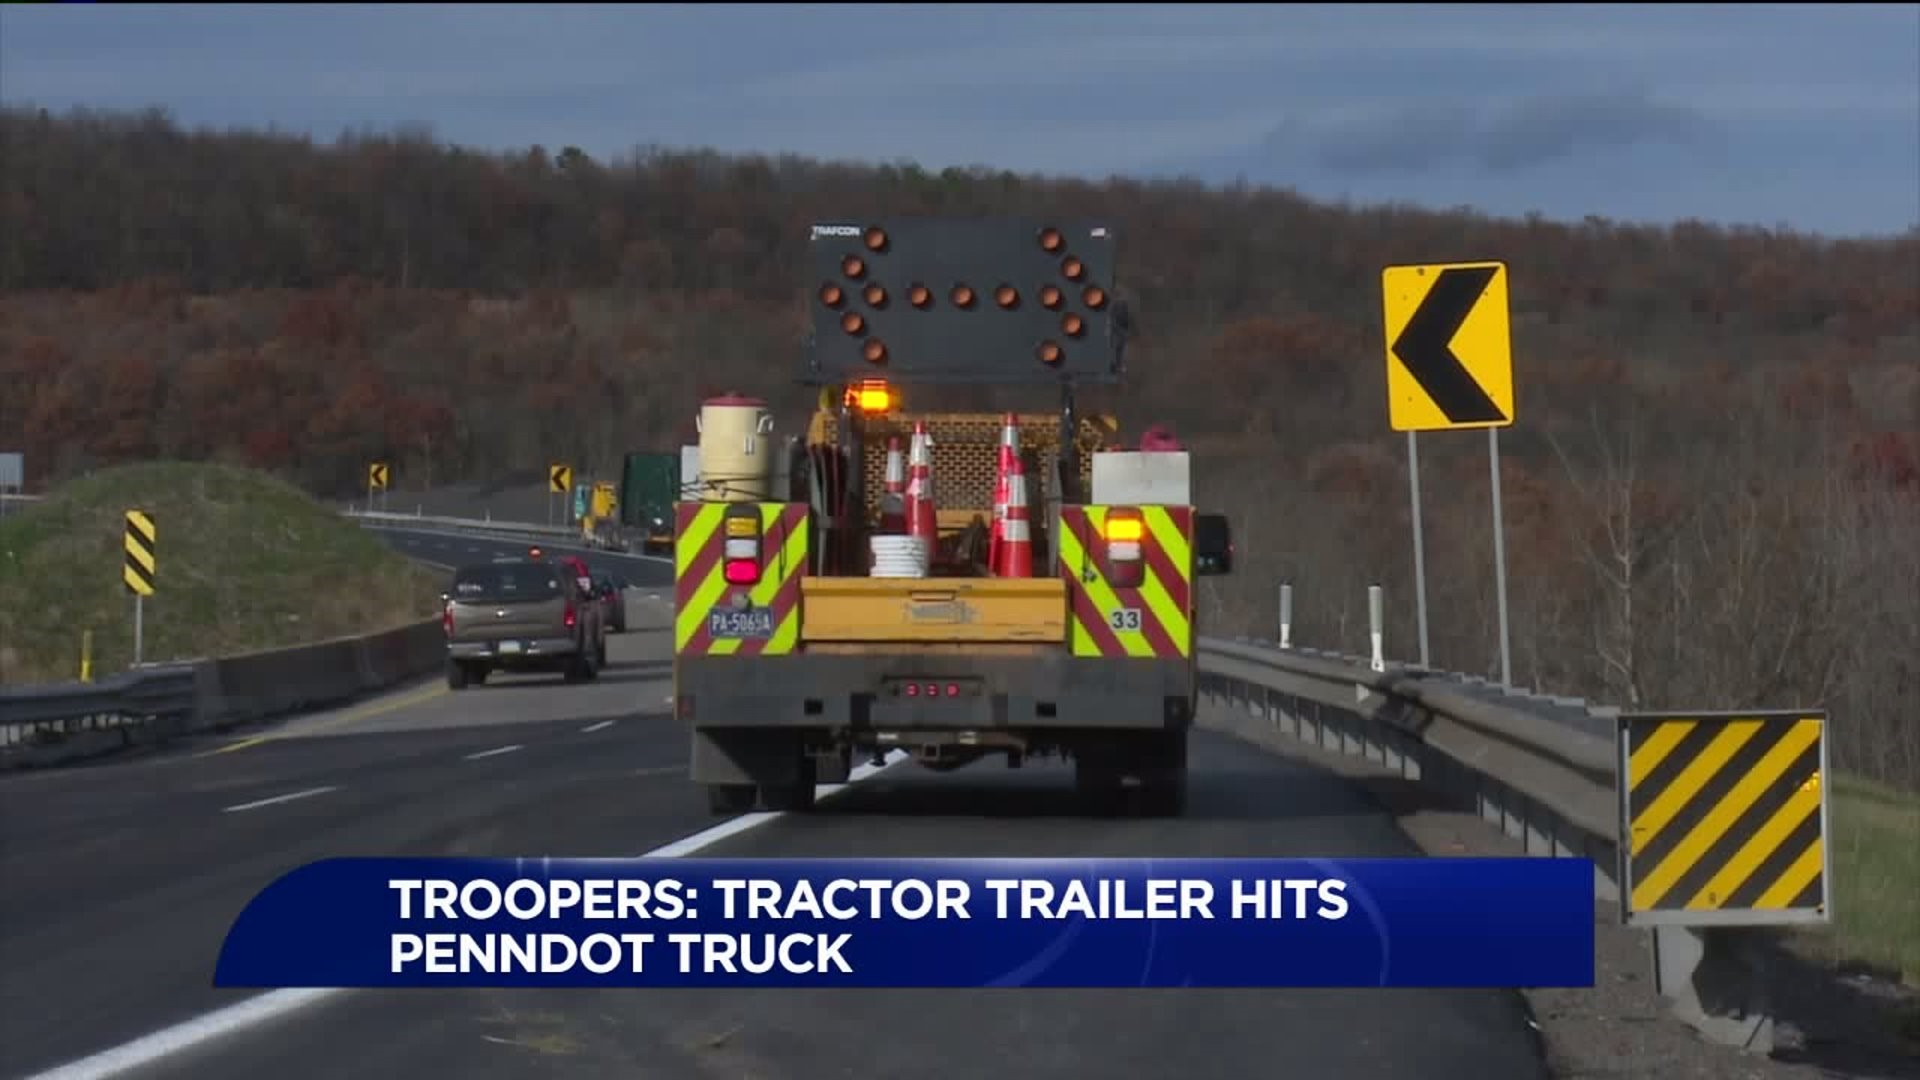 Troopers: Tractor Trailer Hit PennDOT Truck on I-81